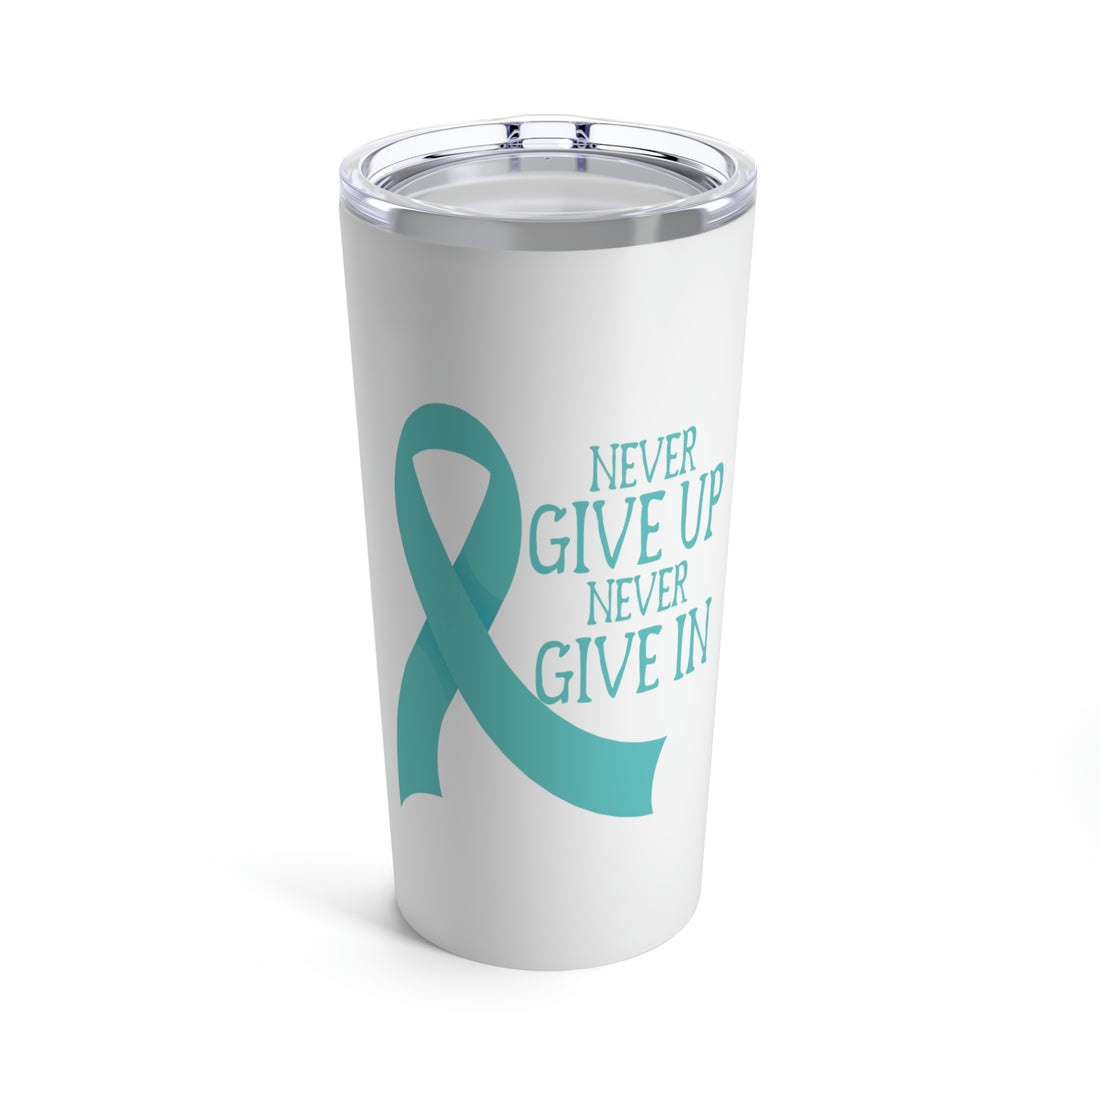 Never Give Up Never Give In - Tumbler 20oz